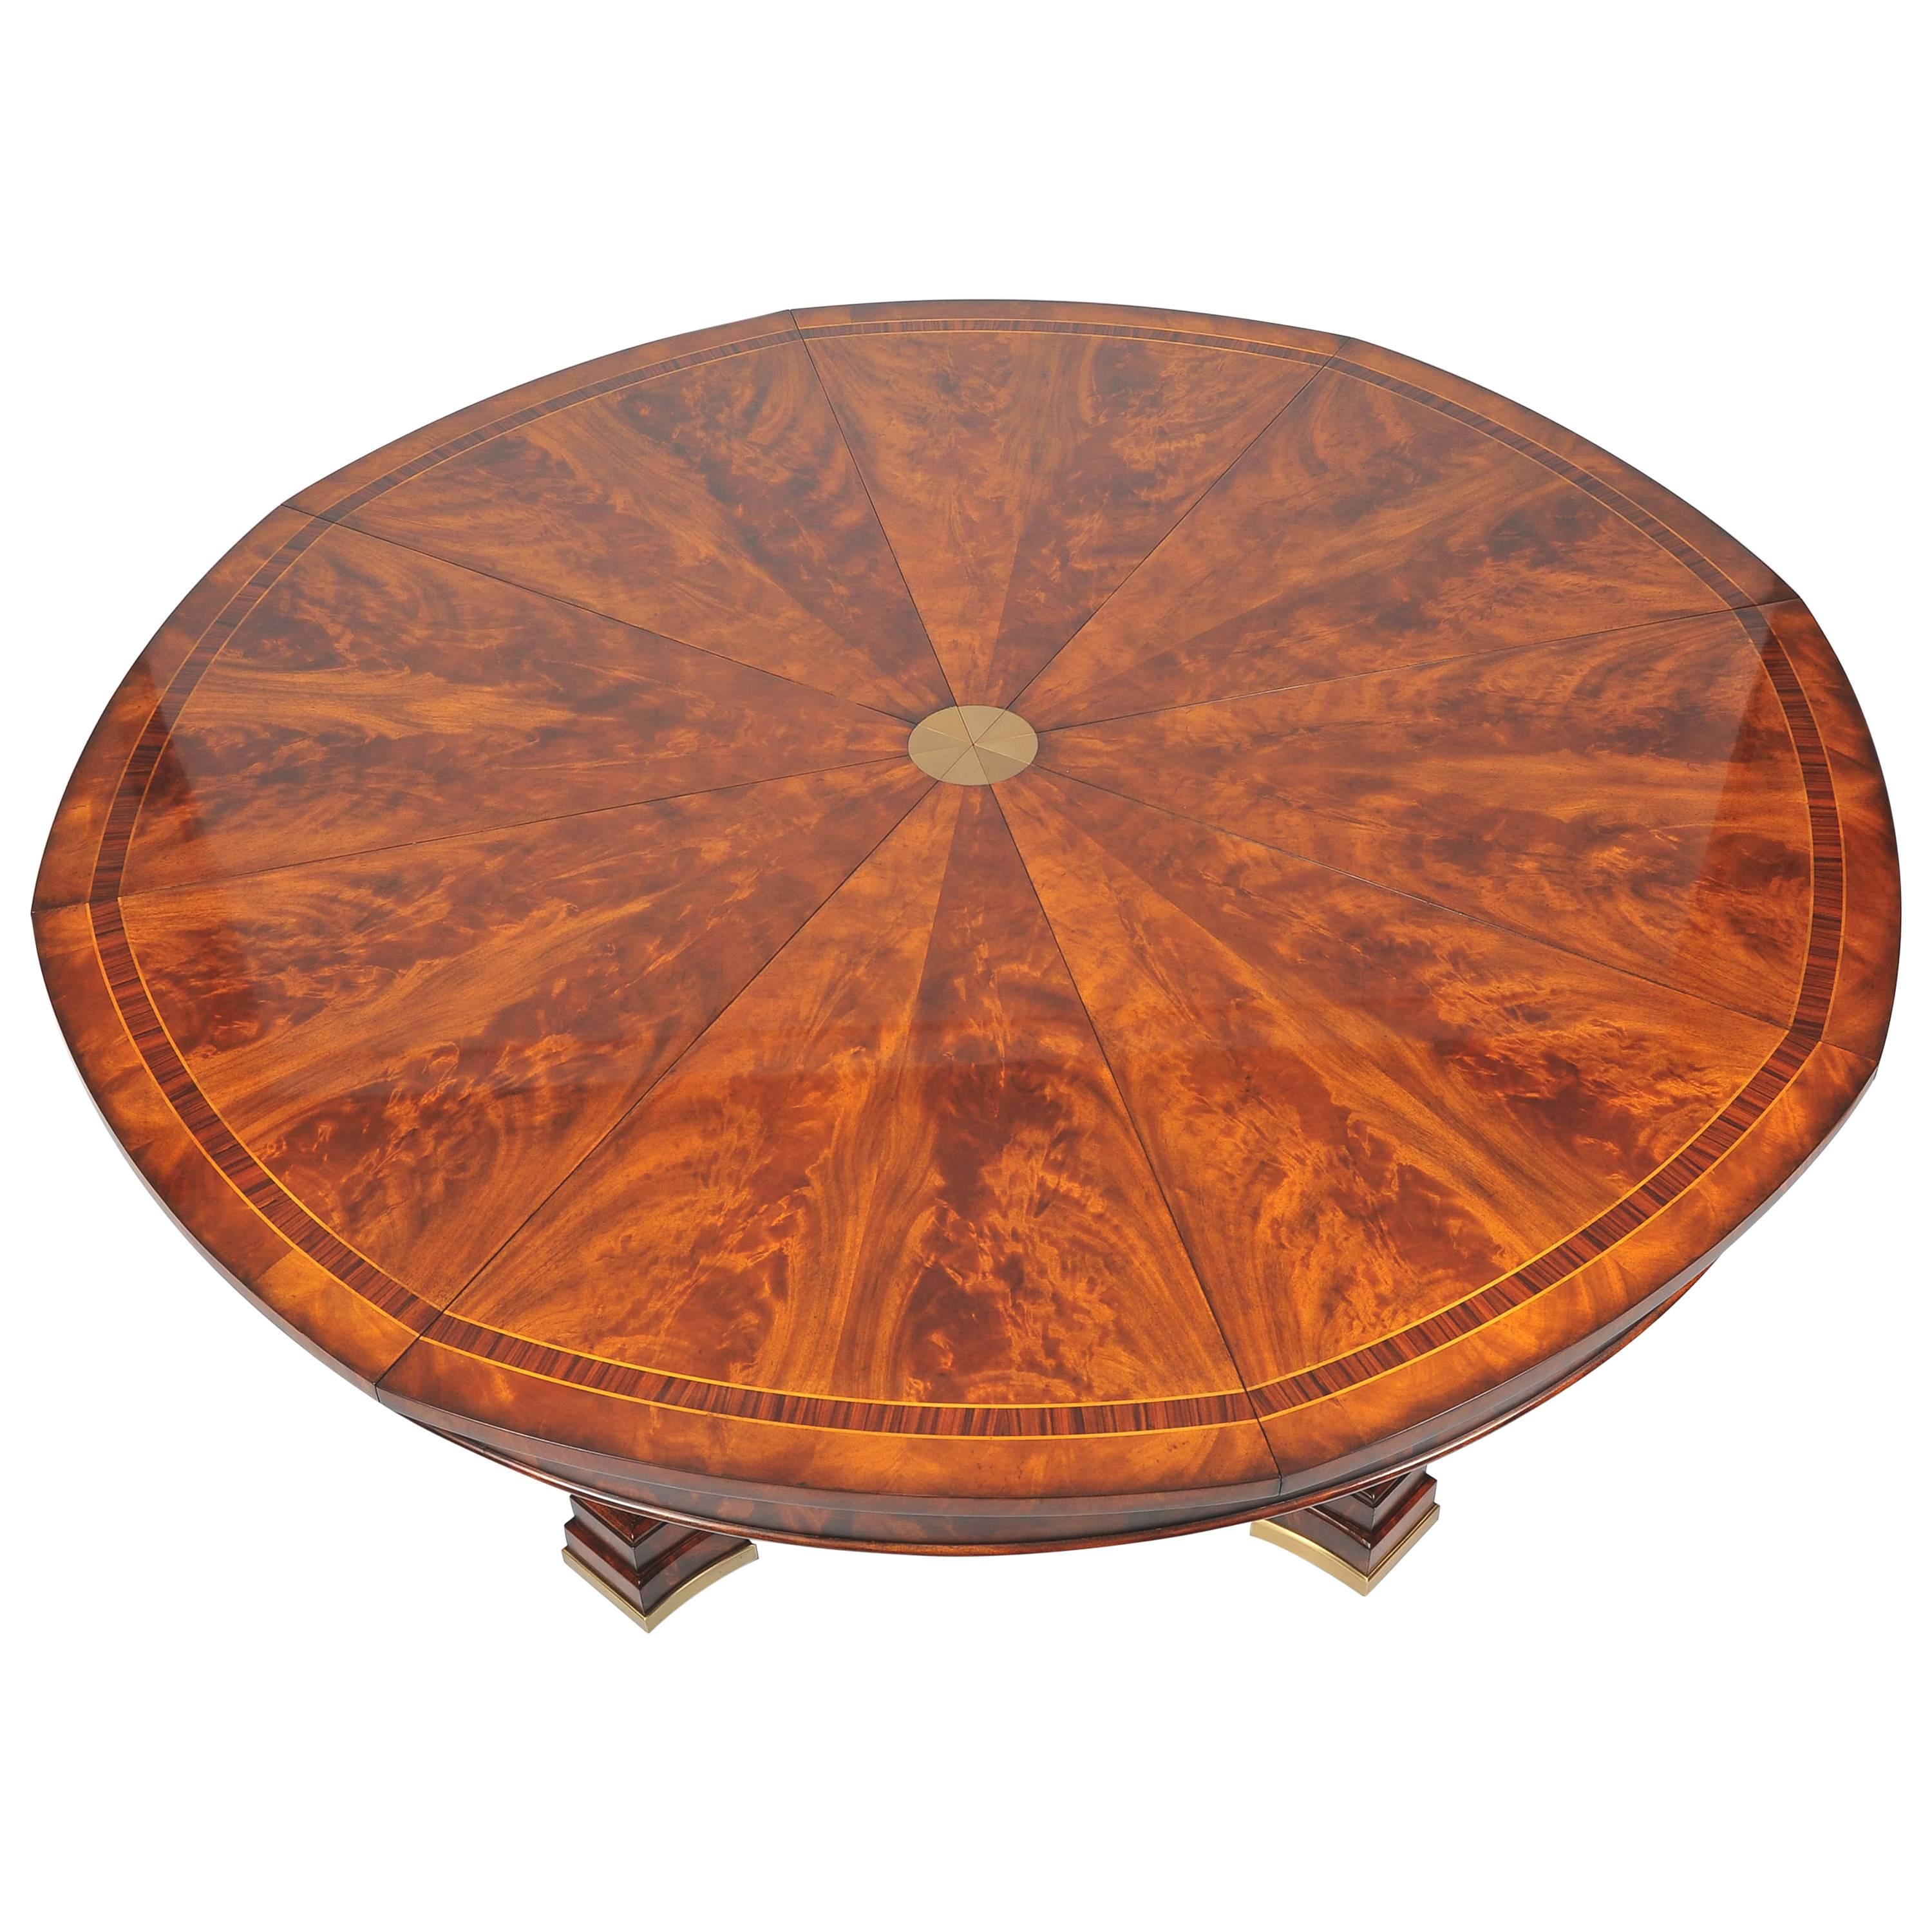 This stunning and high polished mahogany circular dining table features a state of the art extending metal mechanism which allows the table to open up to an additional 24 in-61 cm. The table measures 67 ¼ in-171 cm in diameter when closed and opens